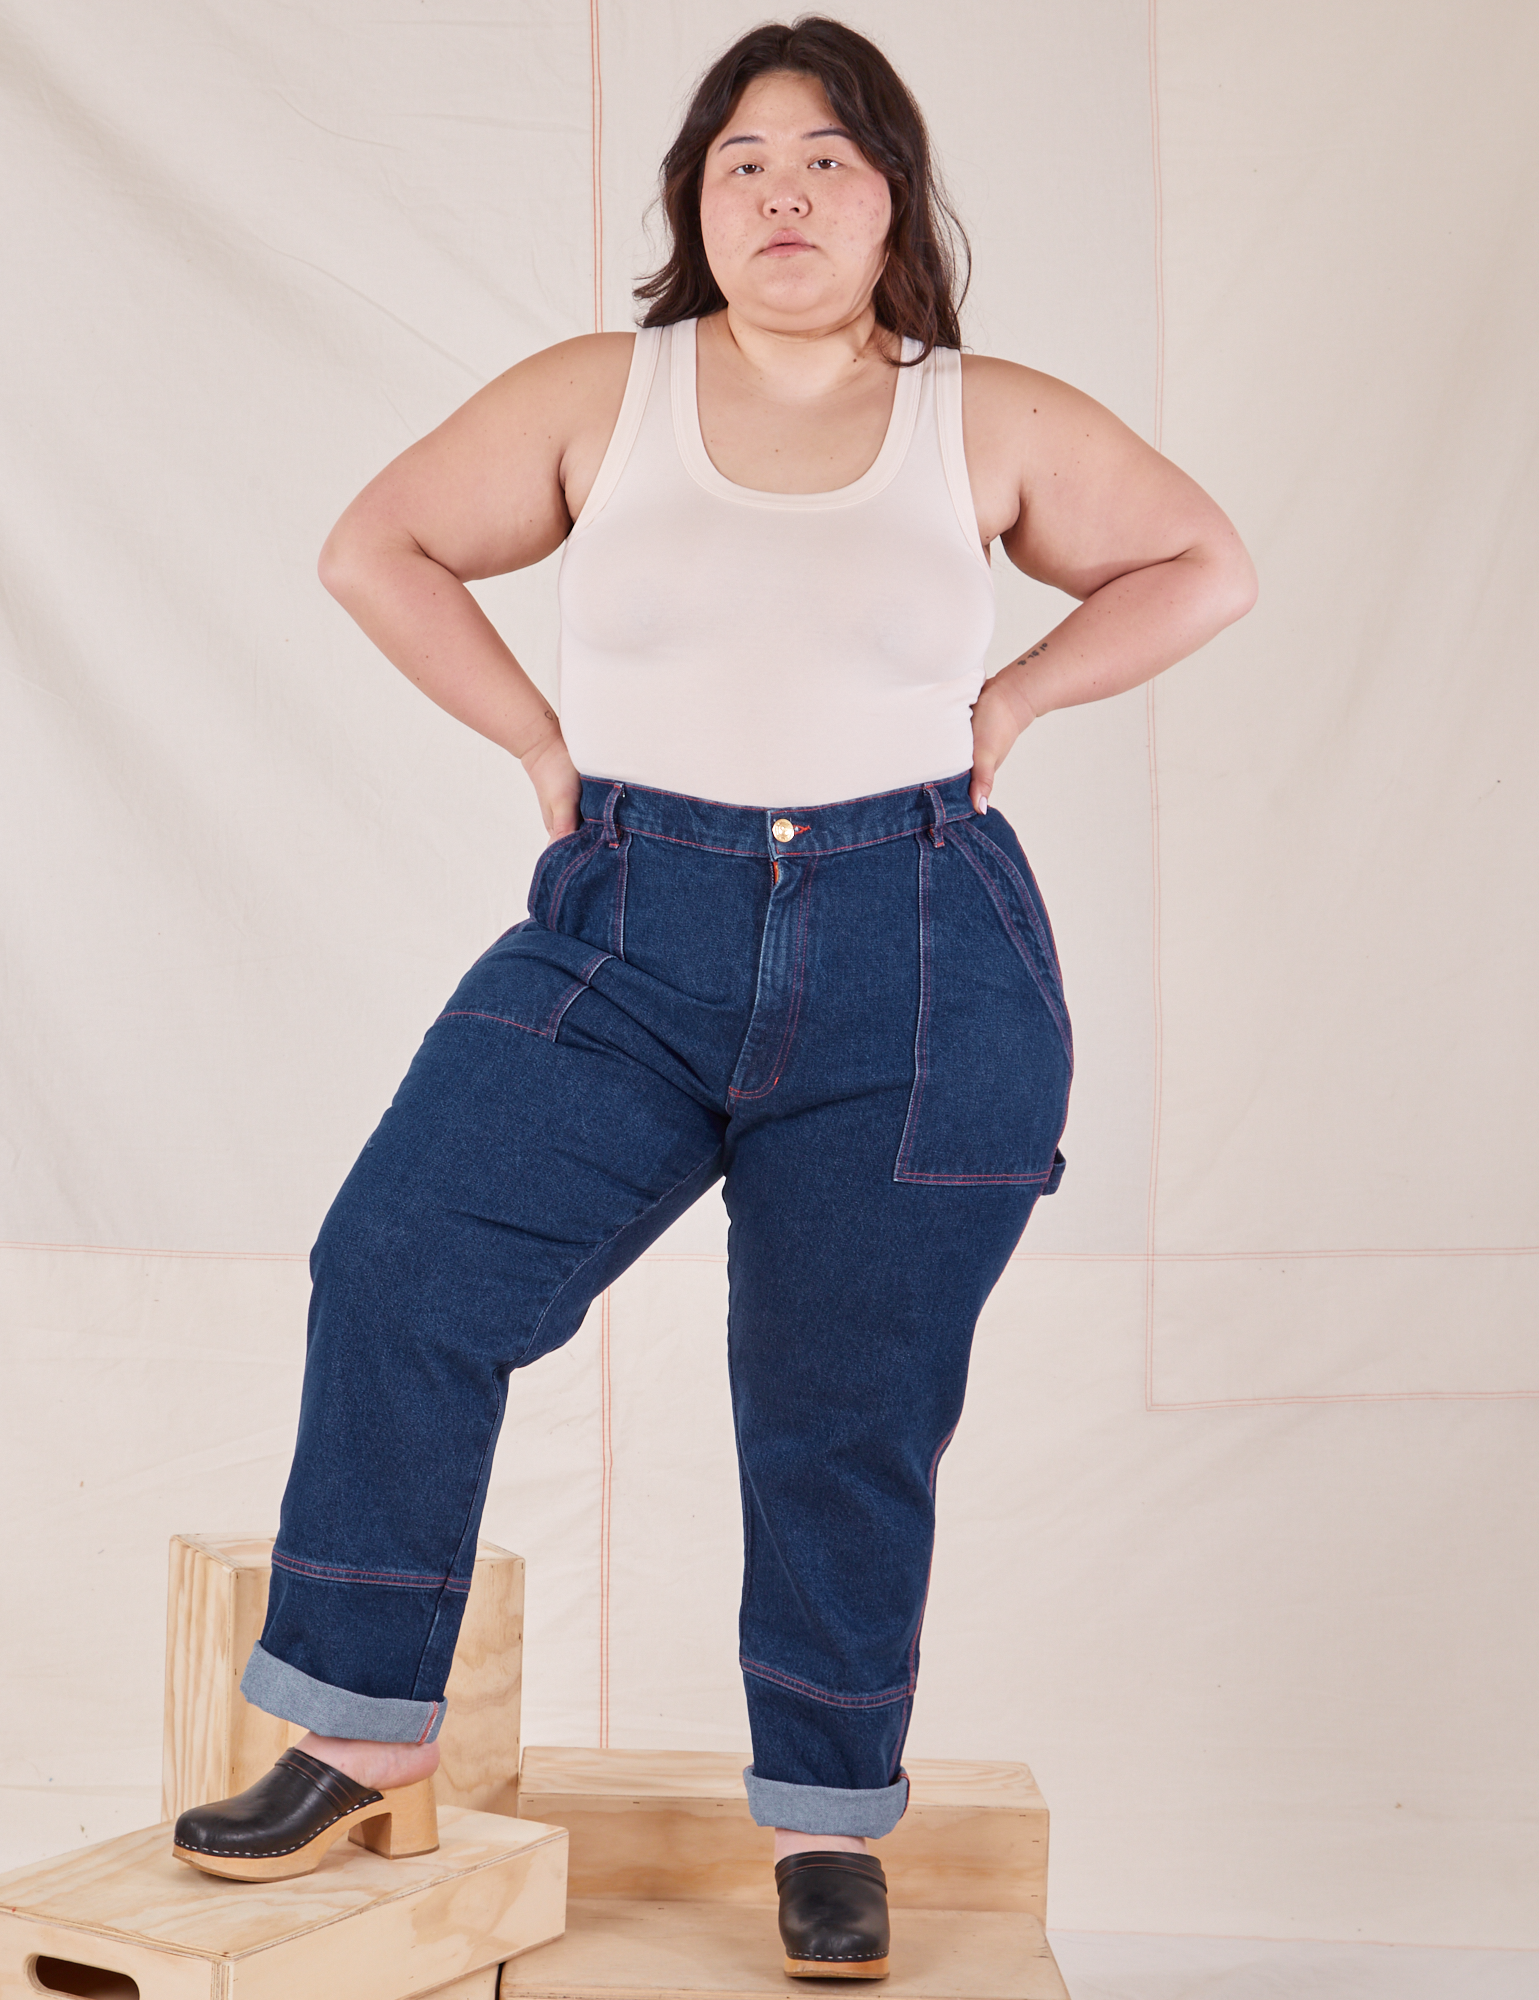 Ashley is 5&#39;7&quot; and wearing 1XL Carpenter Jeans in Dark Wash paired with our vintage off-white Tank Top